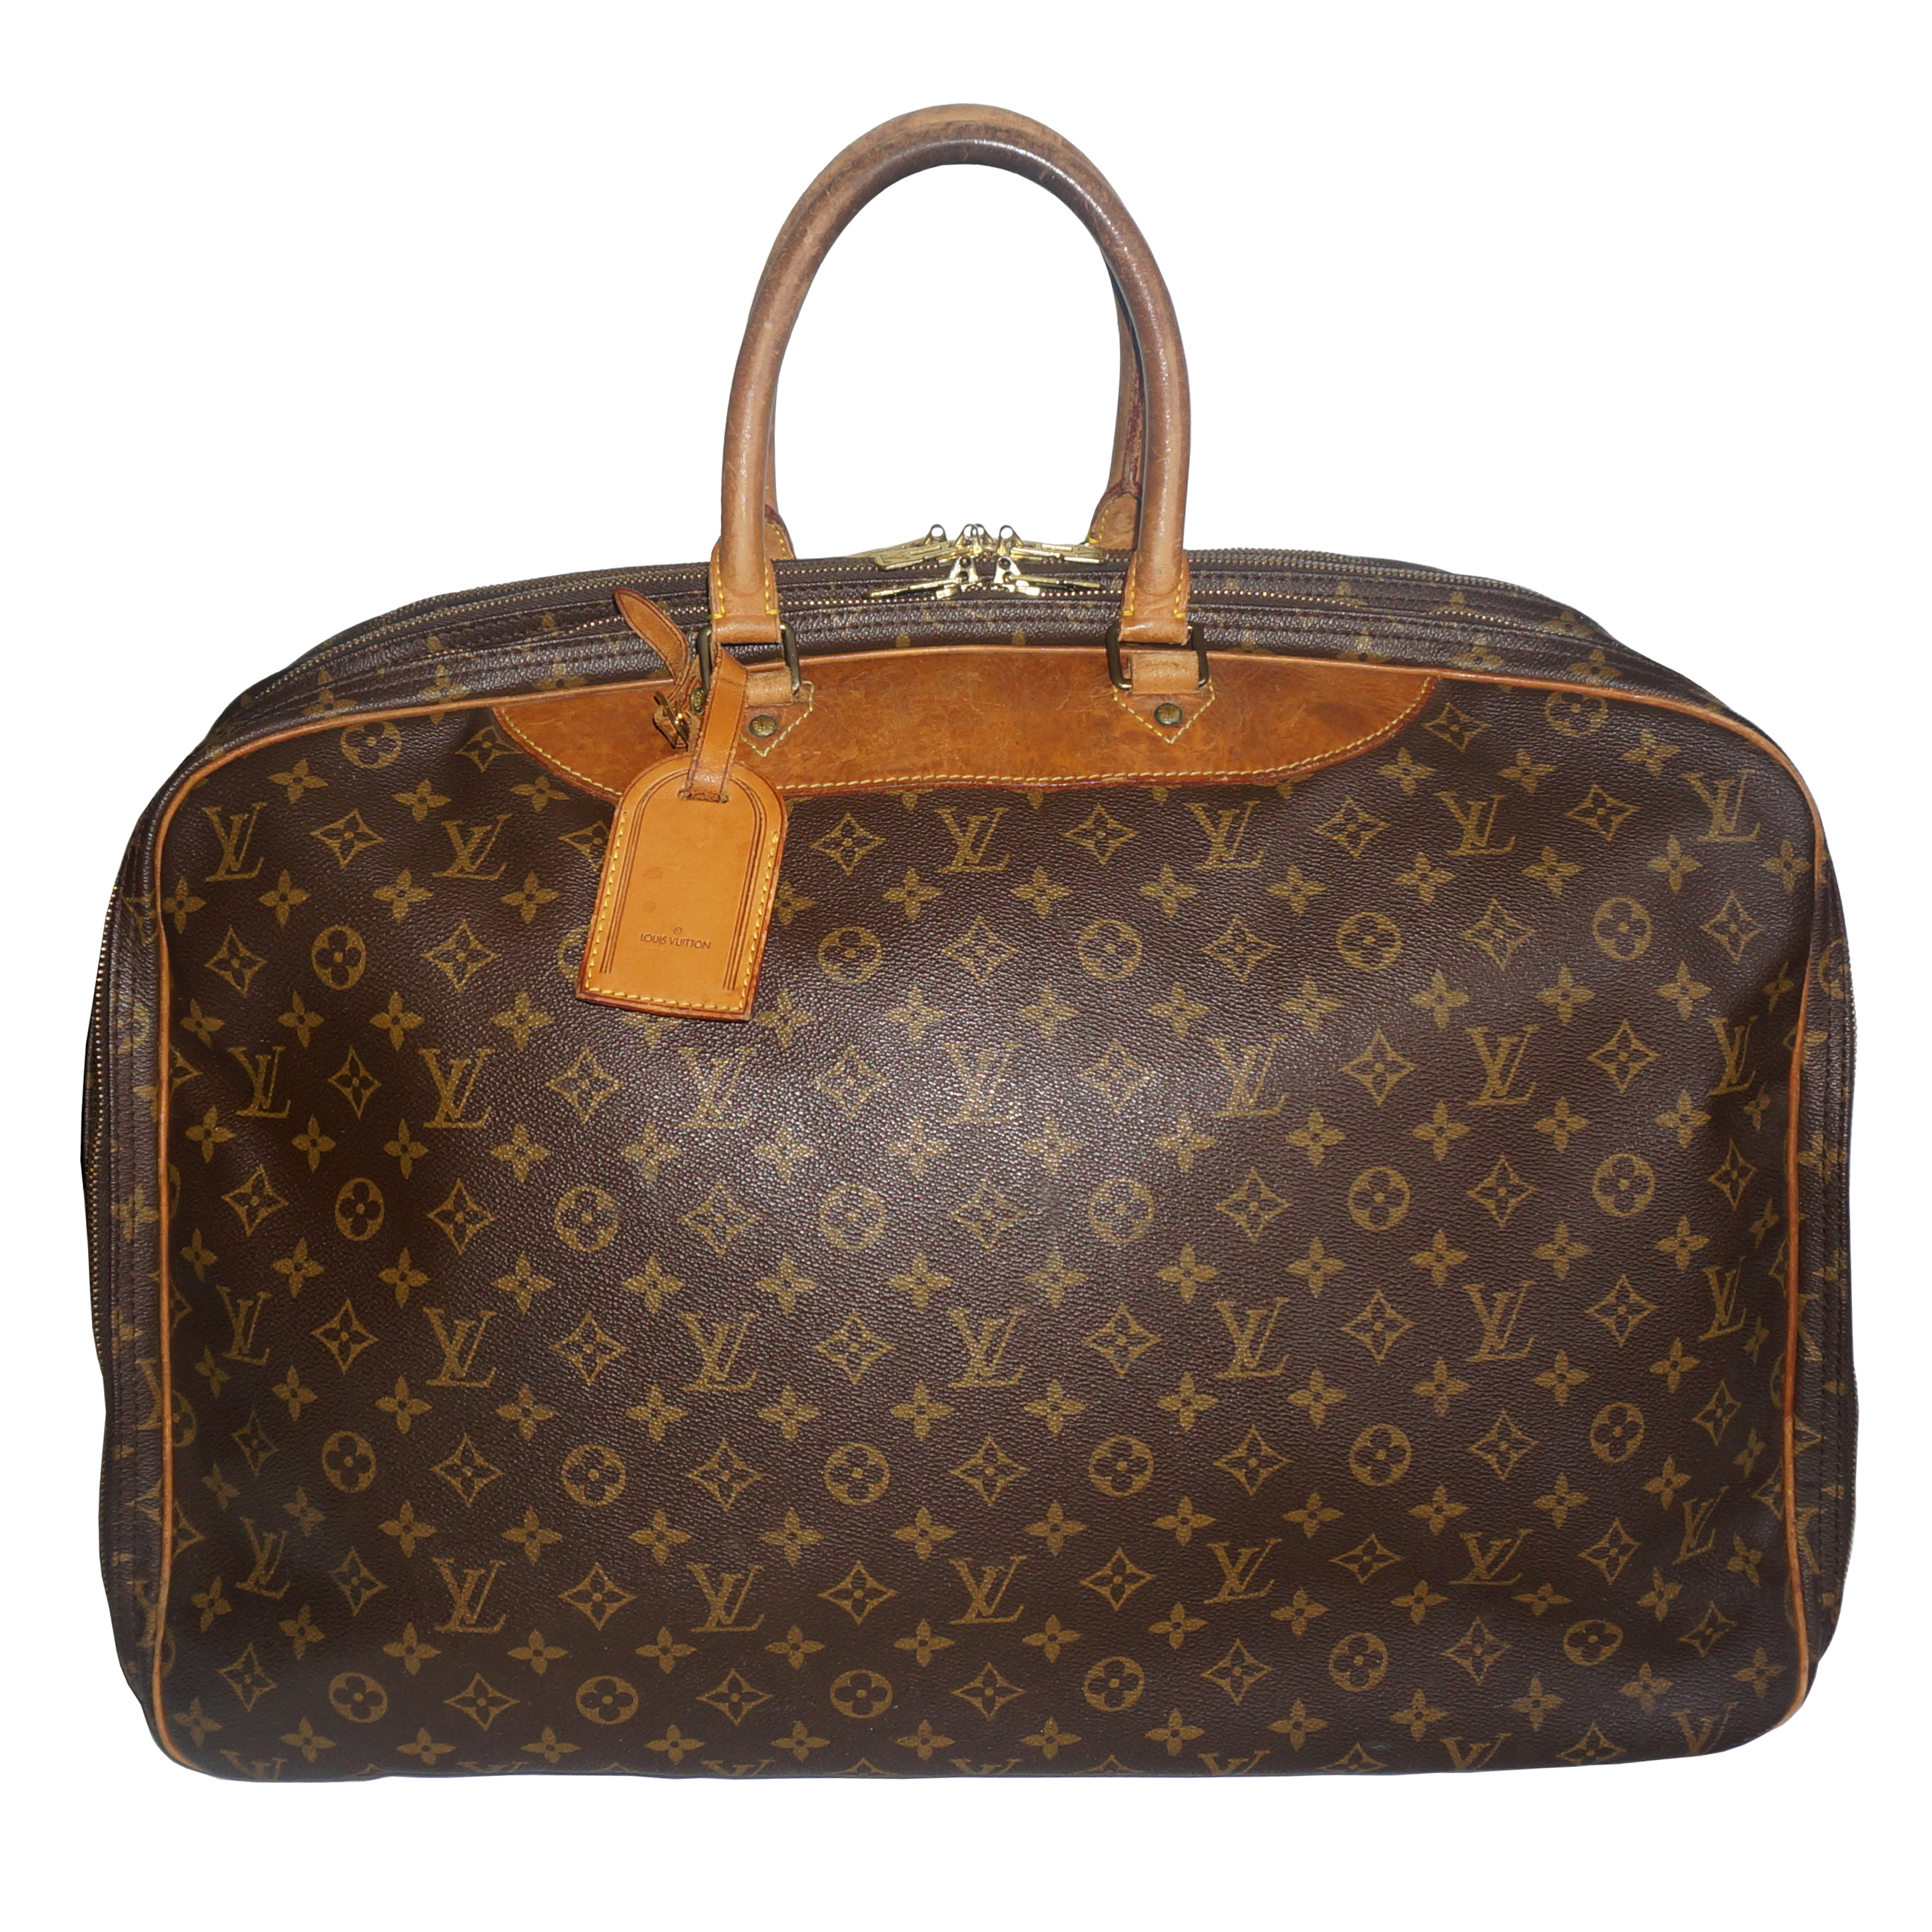 Rare, Louis Vuitton Weekender Bag with Iconic LV Monogram and